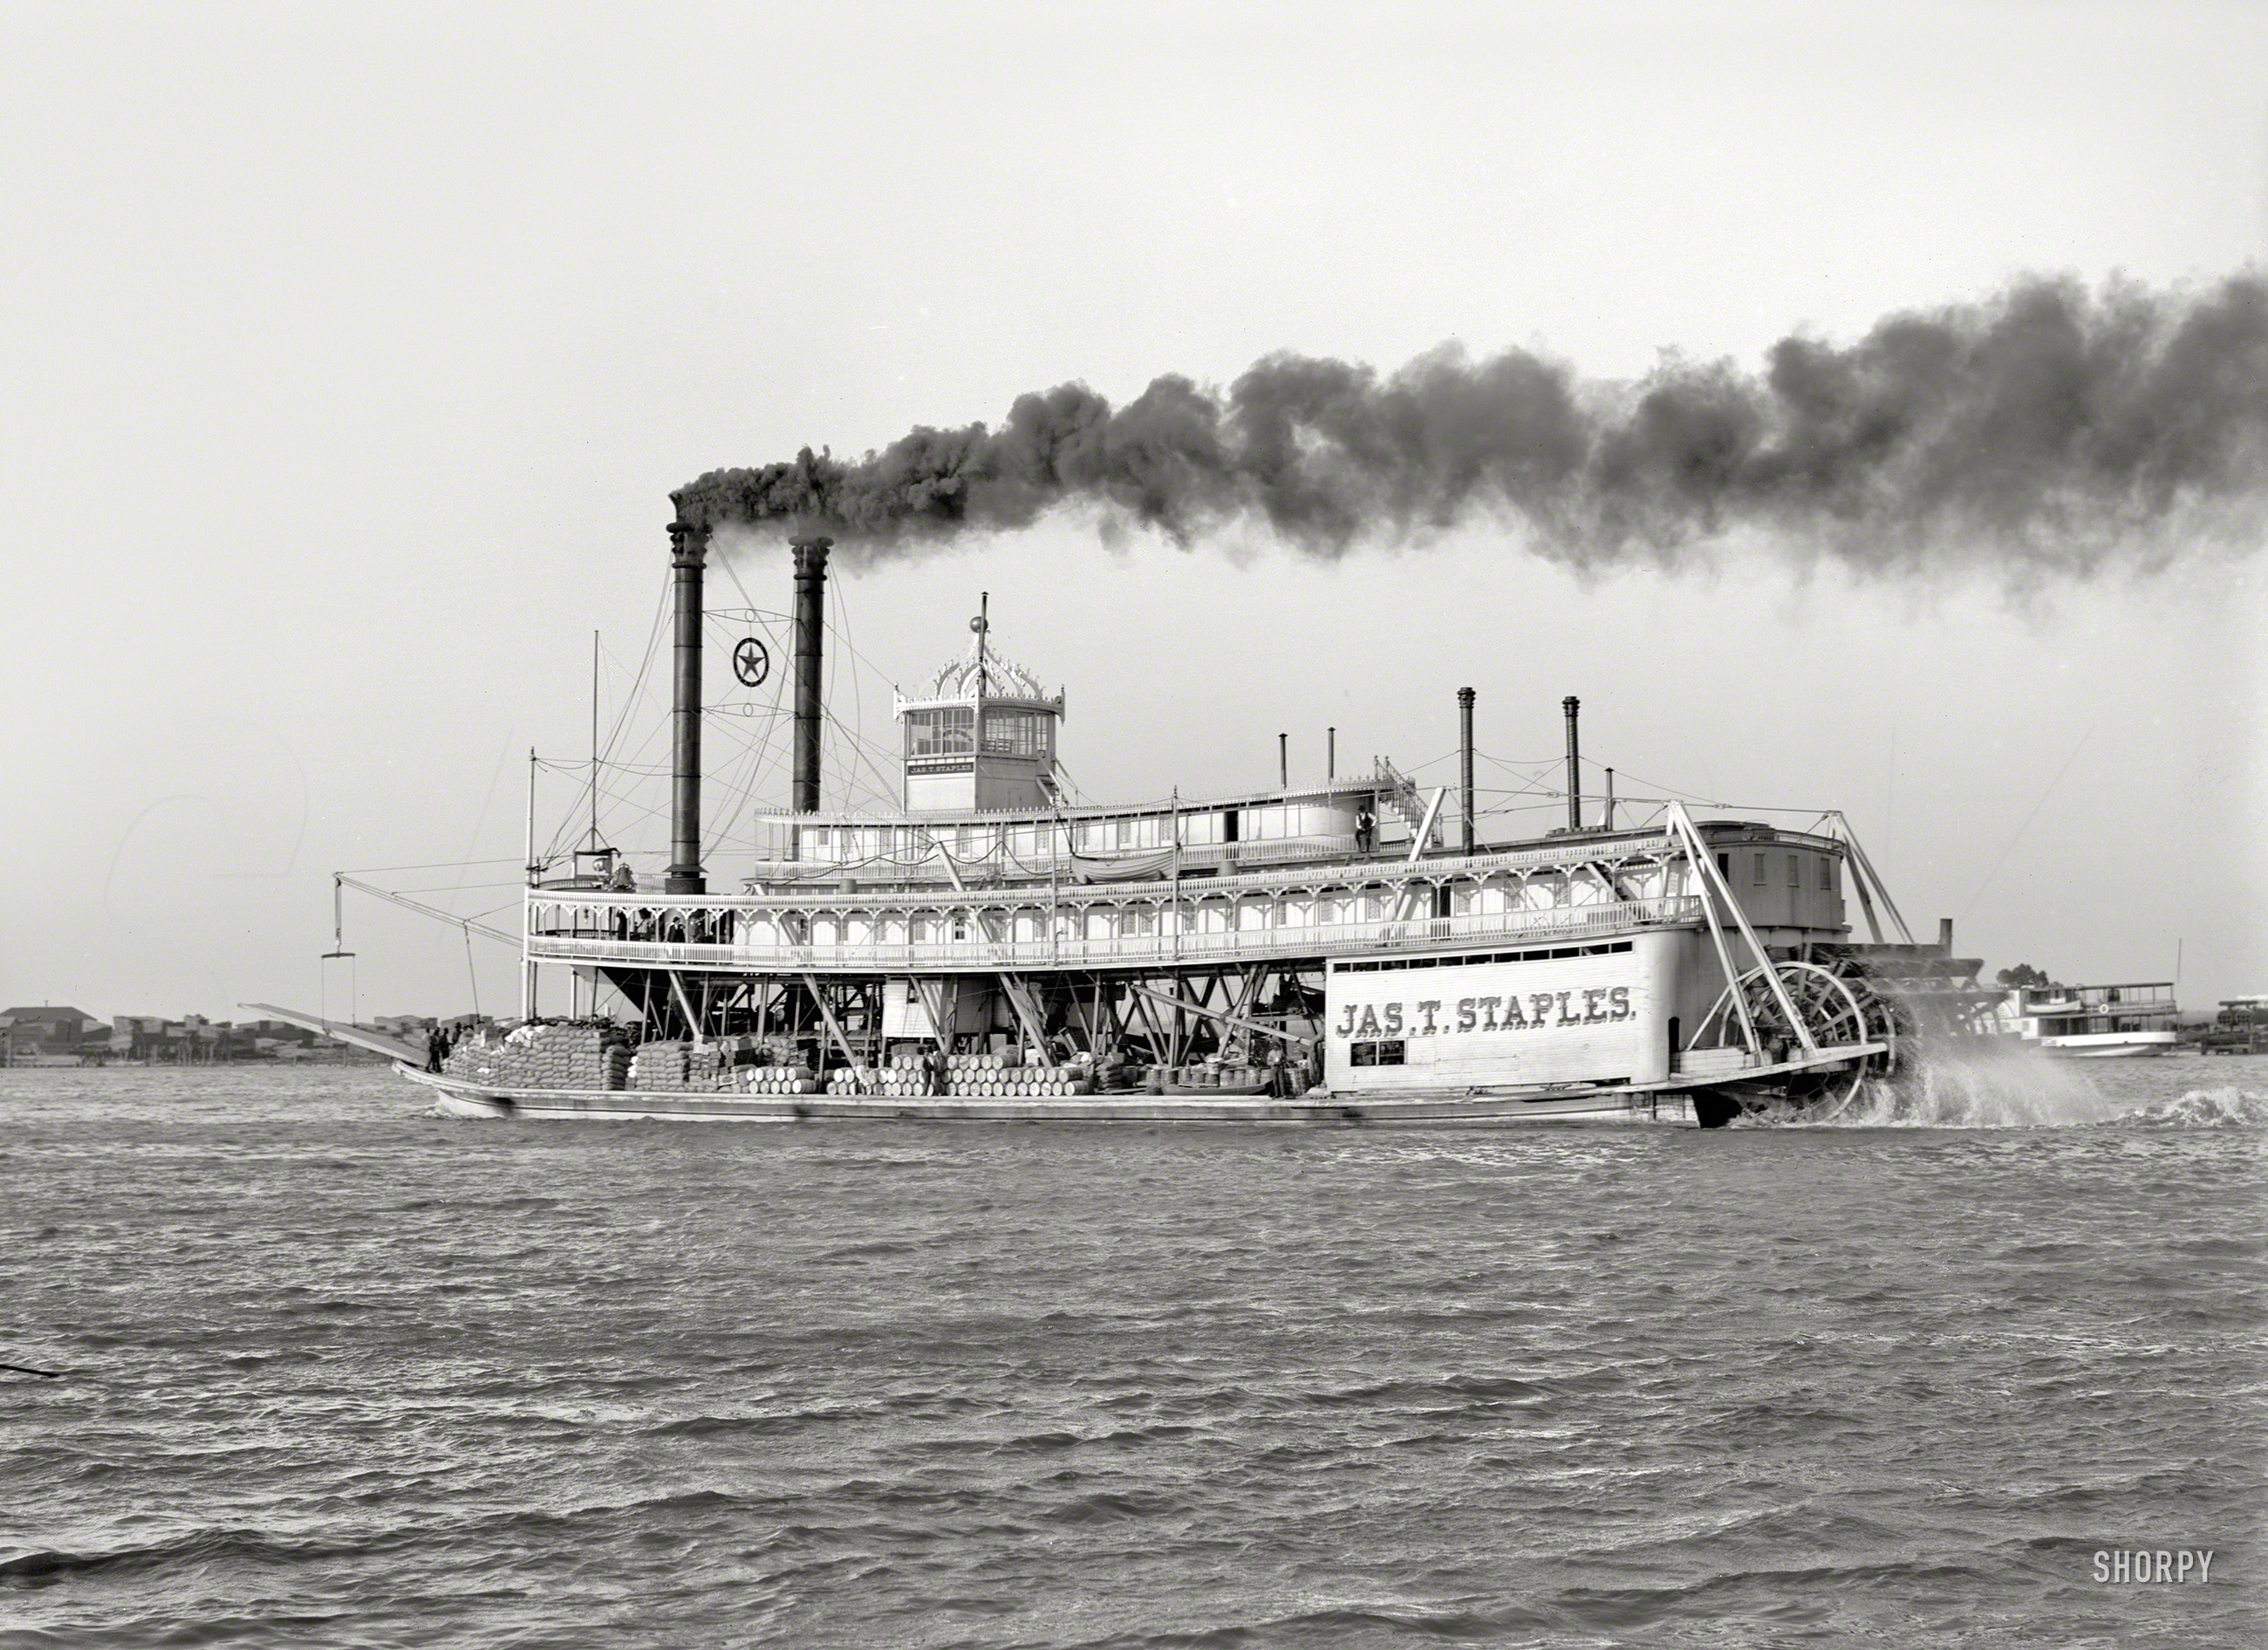 Mobile, Alabama. "River packet Jas. T. Staples." Sternwheeler steamboat (known as "Big Jim") launched at Mobile in 1908; plied the Tombigbee River between Demopolis and Mobile; destroyed in a boiler explosion at Powes Landing in 1913 at a cost of 26 lives, one week after its owner had killed himself with a shotgun. 8x10 inch dry plate glass negative, Detroit Publishing Company. View full size.